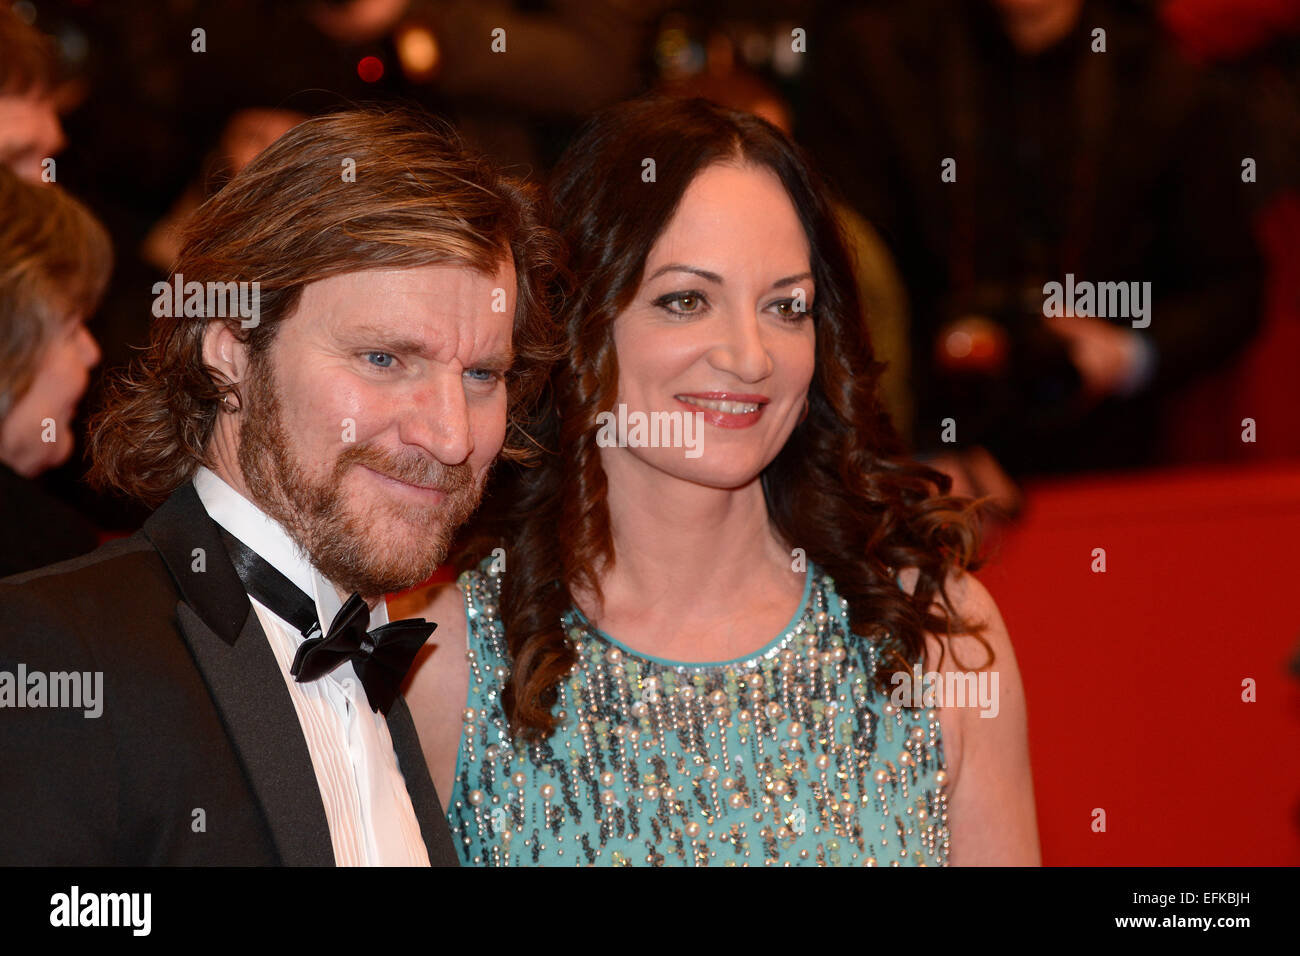 Robert Seeliger and Natalia Wörner attending the 'Nadie Quiere La Noche/Nobody Wants The Night' premiere at the 65th Berlin International Film Festival/Berlinale 2015 on February 05, 2015./picture alliance Stock Photo